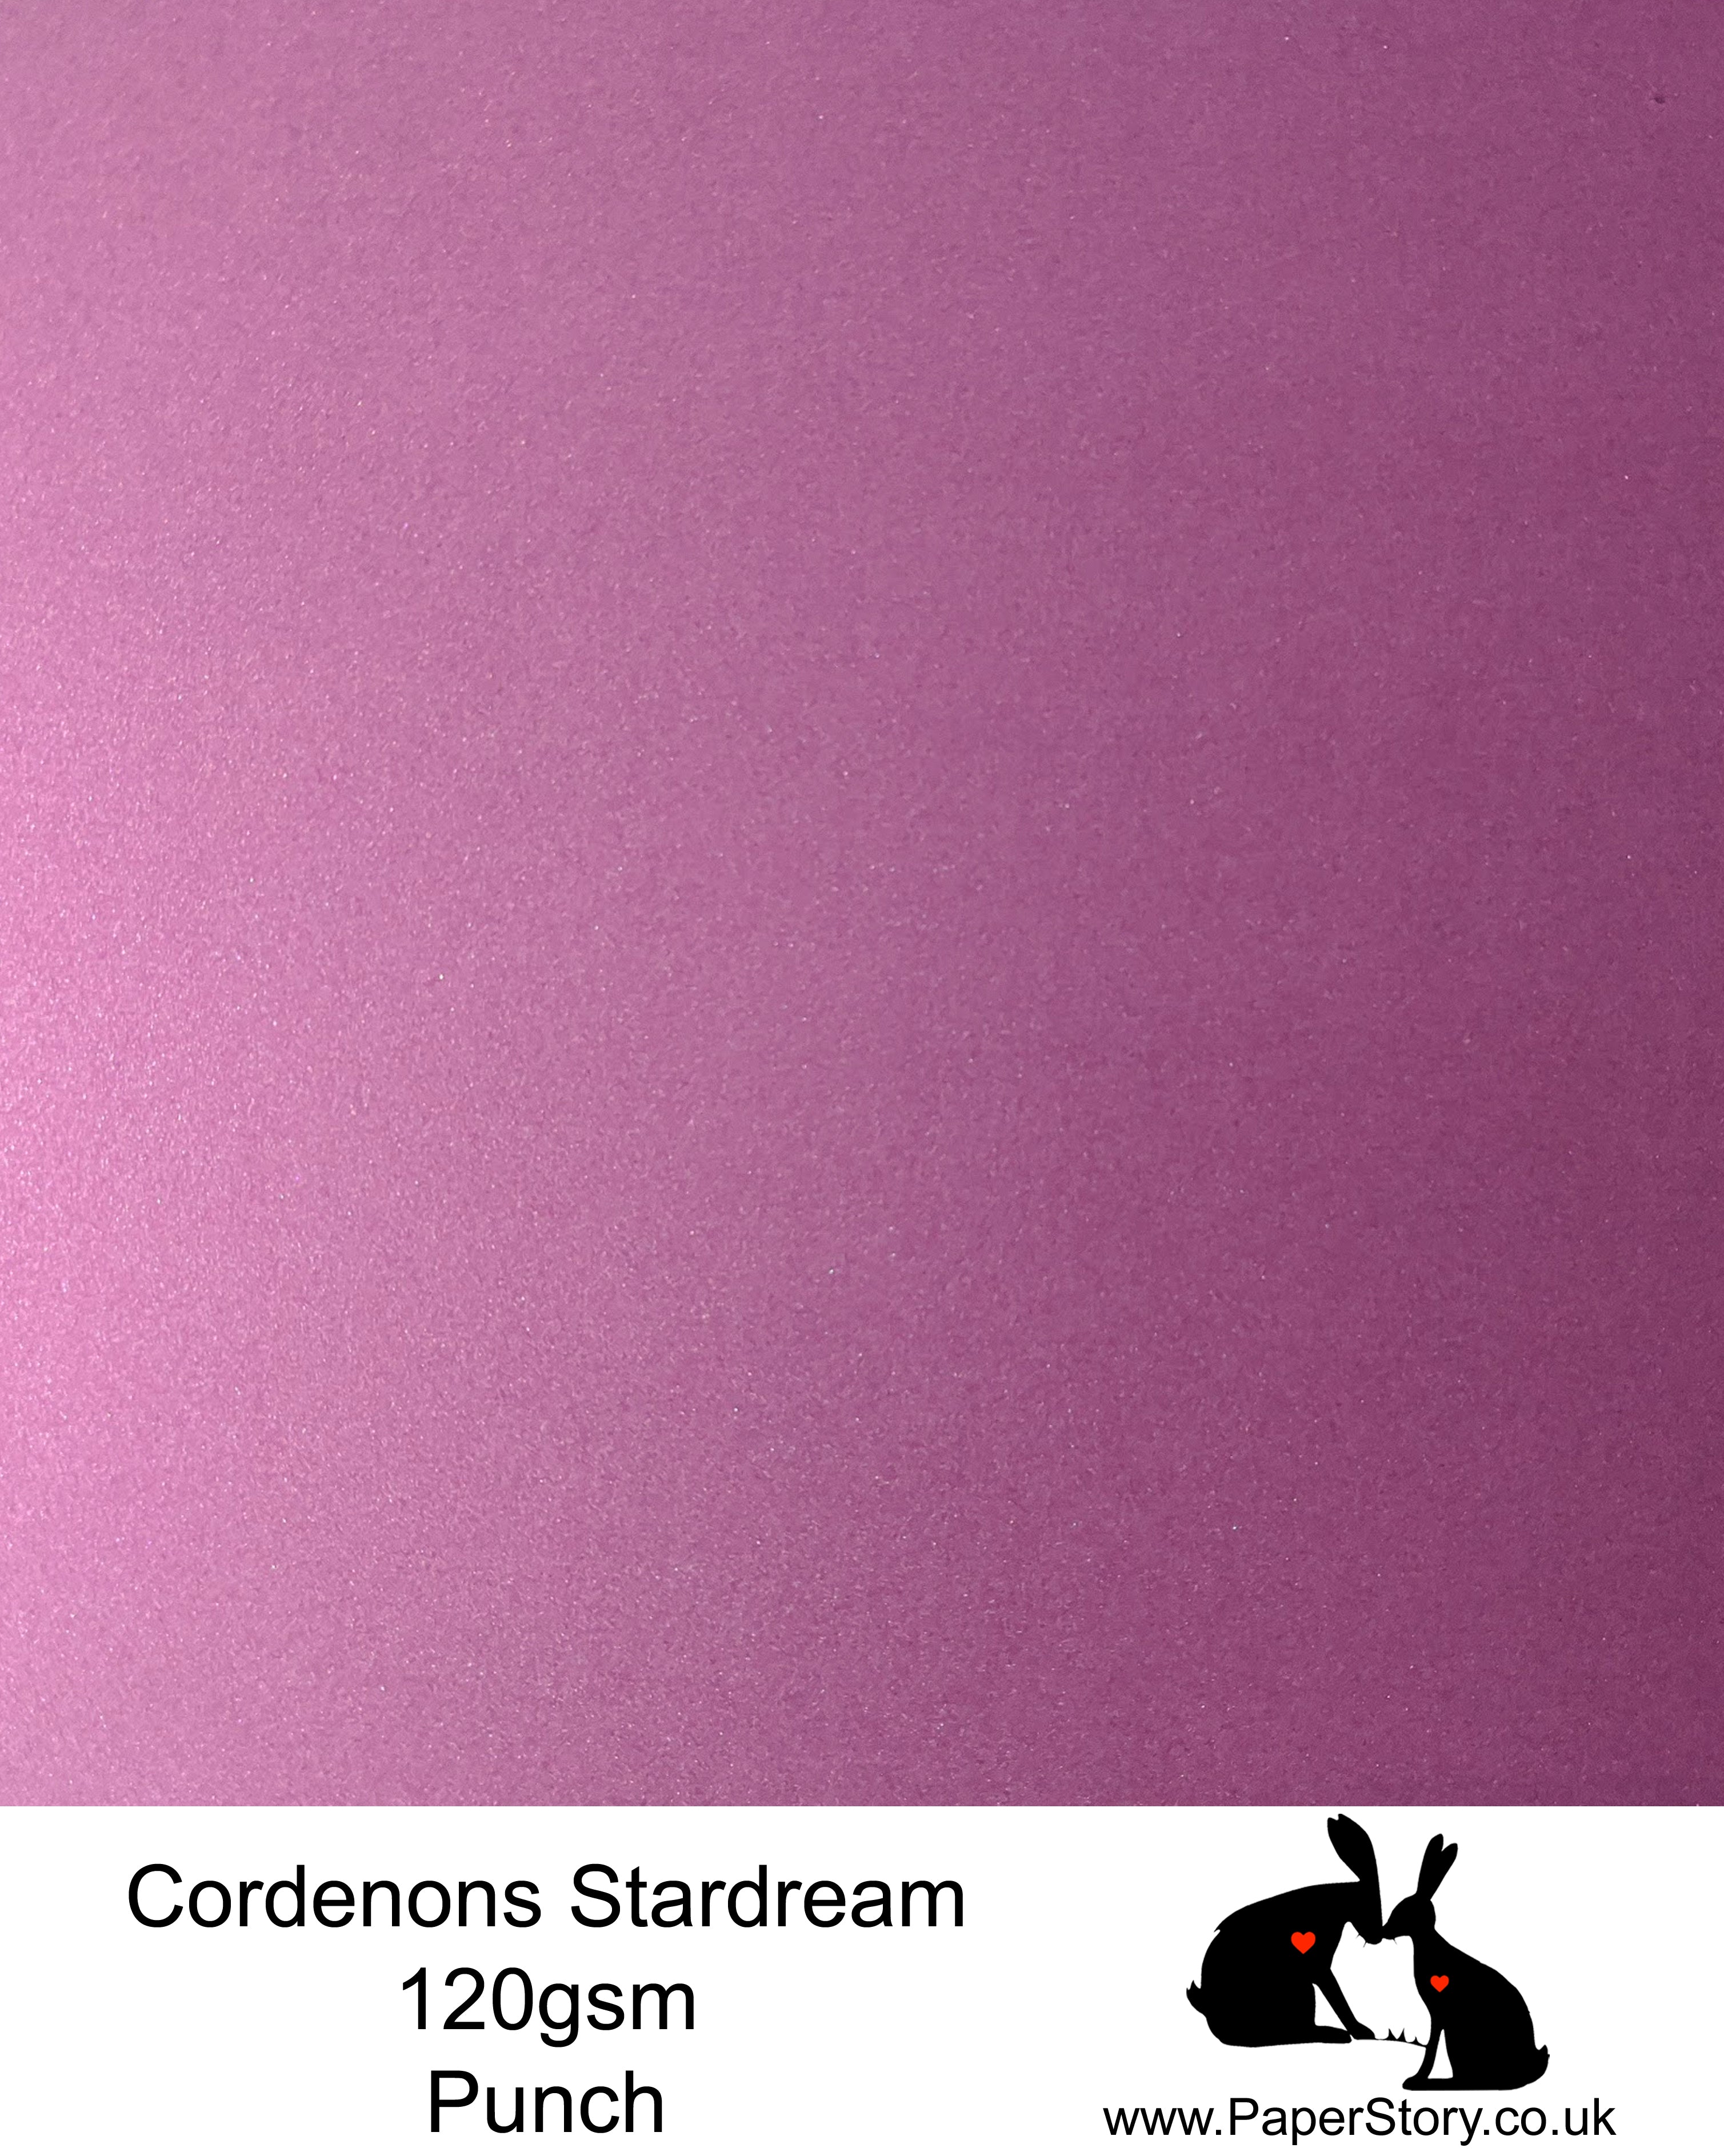 A4 Stardream 120gsm paper for Papercutting, craft, flower making  and wedding stationery. Punch is a vibrant purple with warm notes of red, beautiful floral colour. Stardream is a luxury Italian paper from Italy, it is a double sided quality Pearlescent paper with a matching colour core. FSC Certified, acid free, archival and PH Neutral